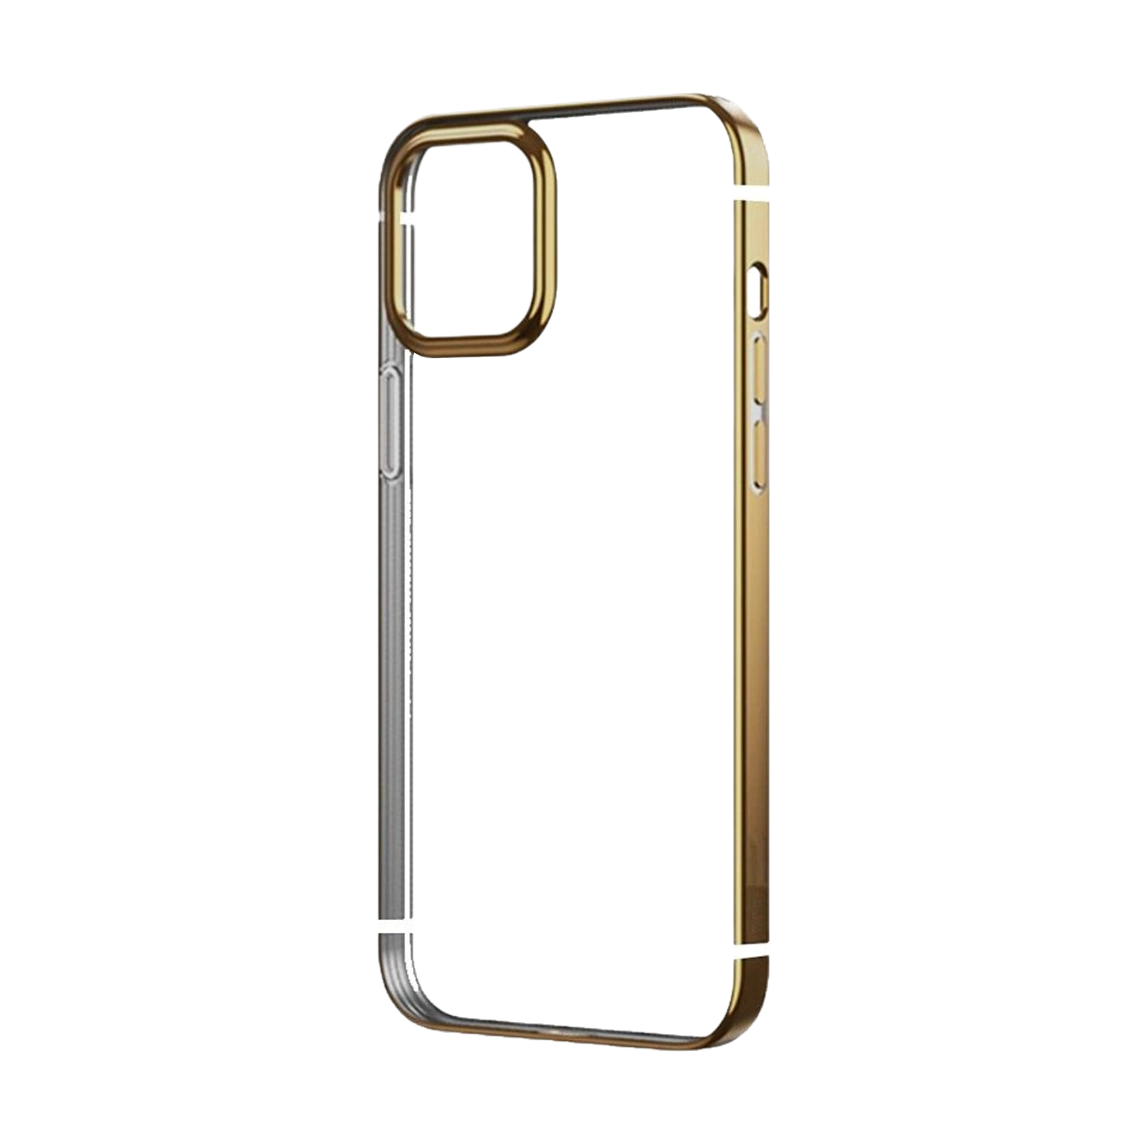 Mutural Case for iPhone 12 Pro Max